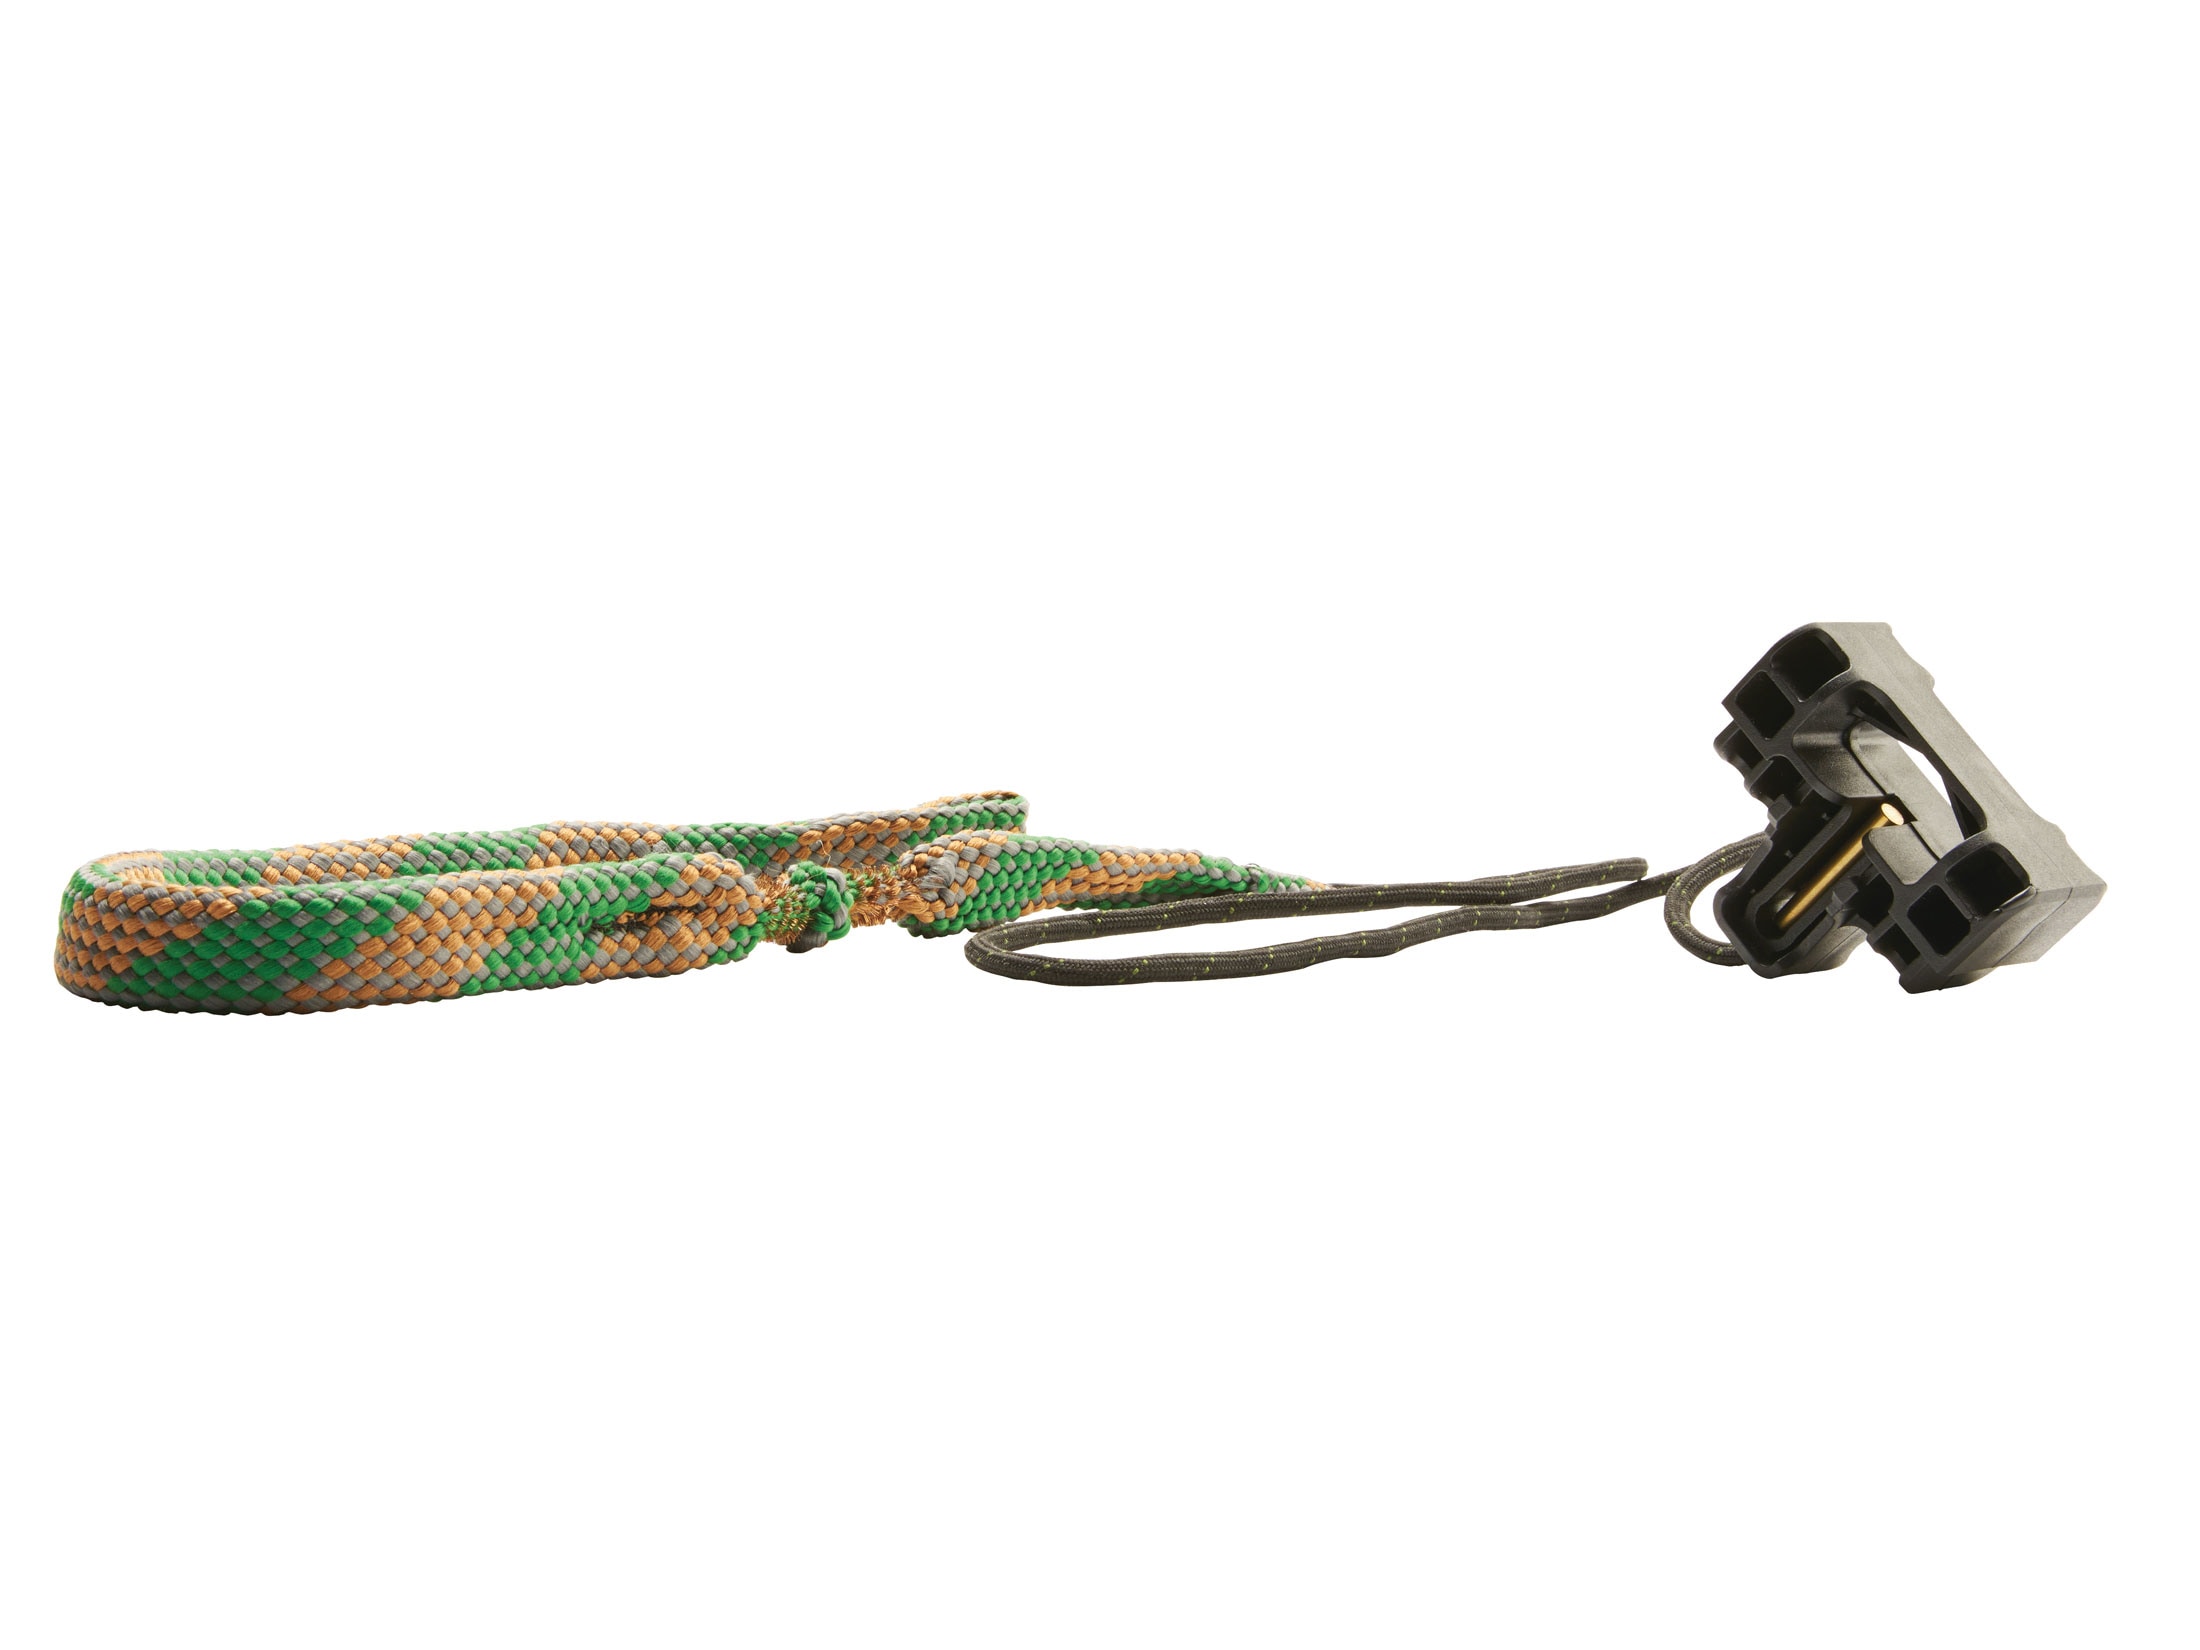 Hoppe’s Viper BoreSnake Bore Cleaner with T-Handle For Sale